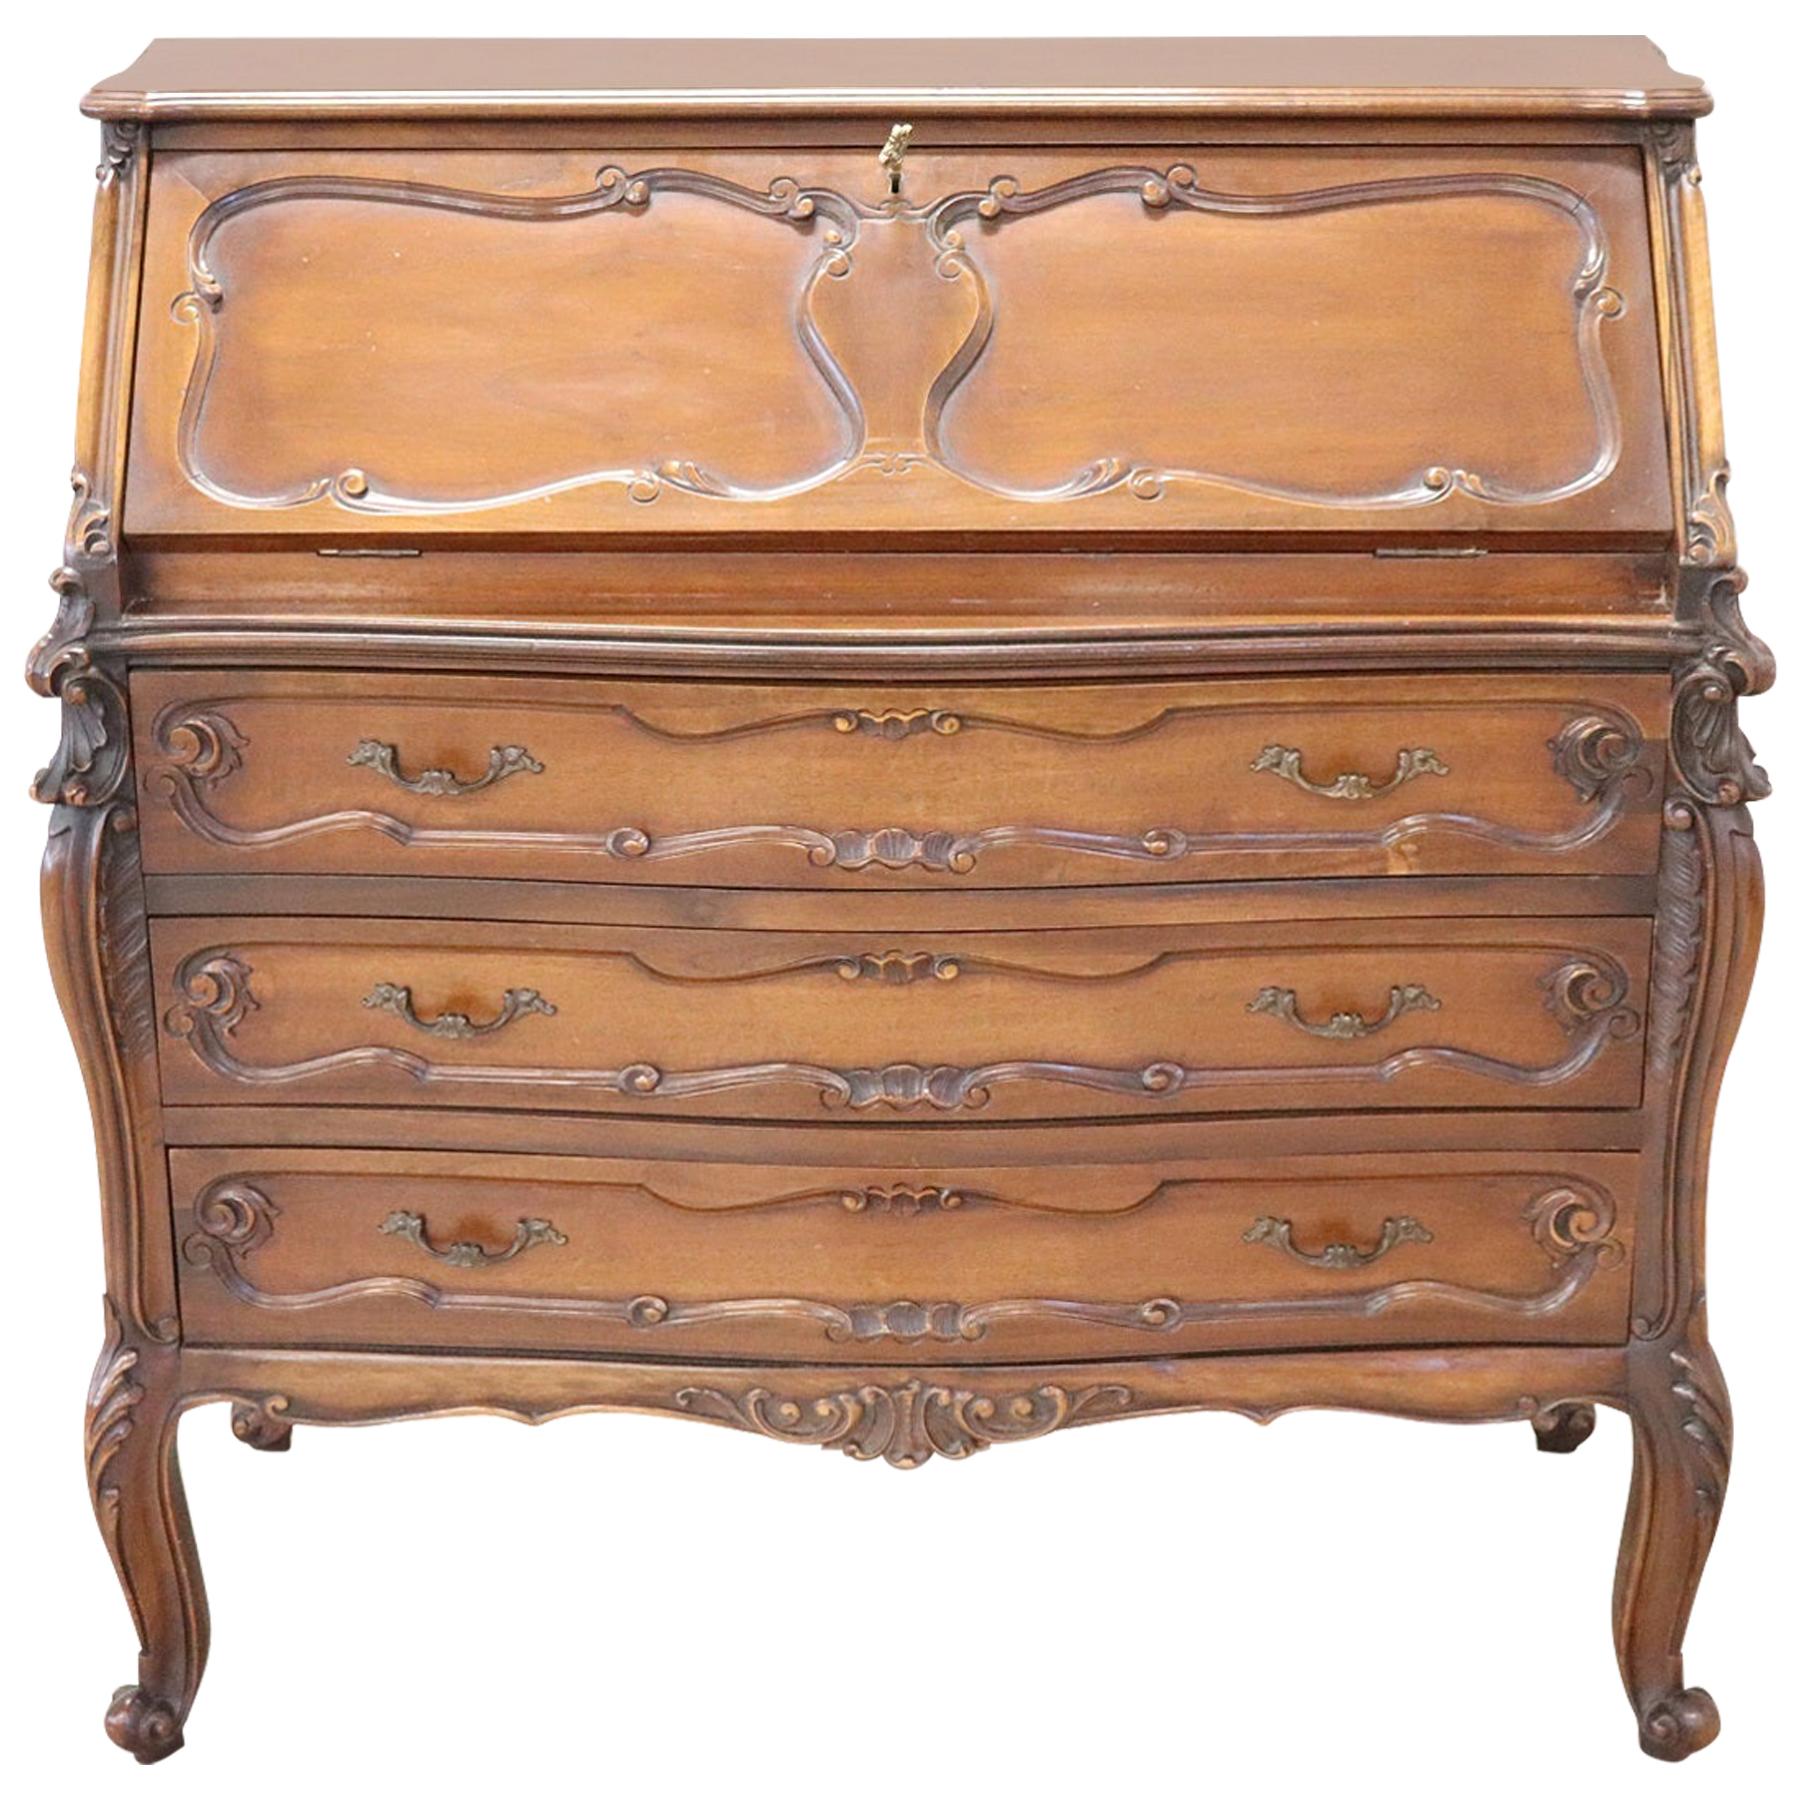 20th Century Louis XV Style Carved Walnut Chest of Drawers with Secrétaire